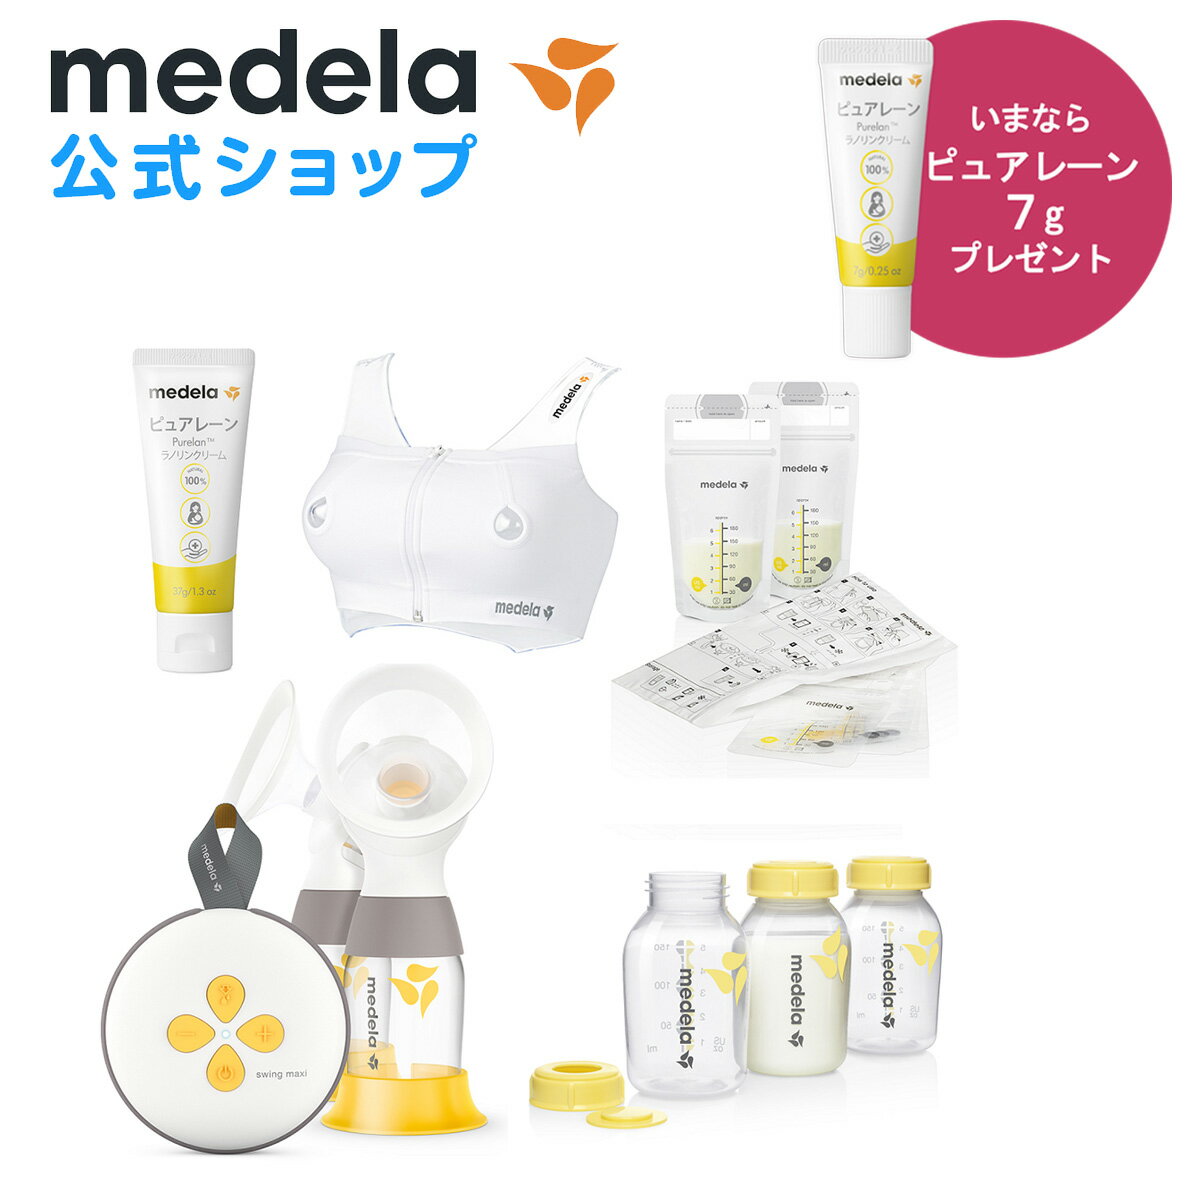  Medela (f) XCOE}LVd i2021Nfj _u|v ͂߂ăZbg d d@ d |    @ ɂイ    d @  oY xr[pi xr[ObY